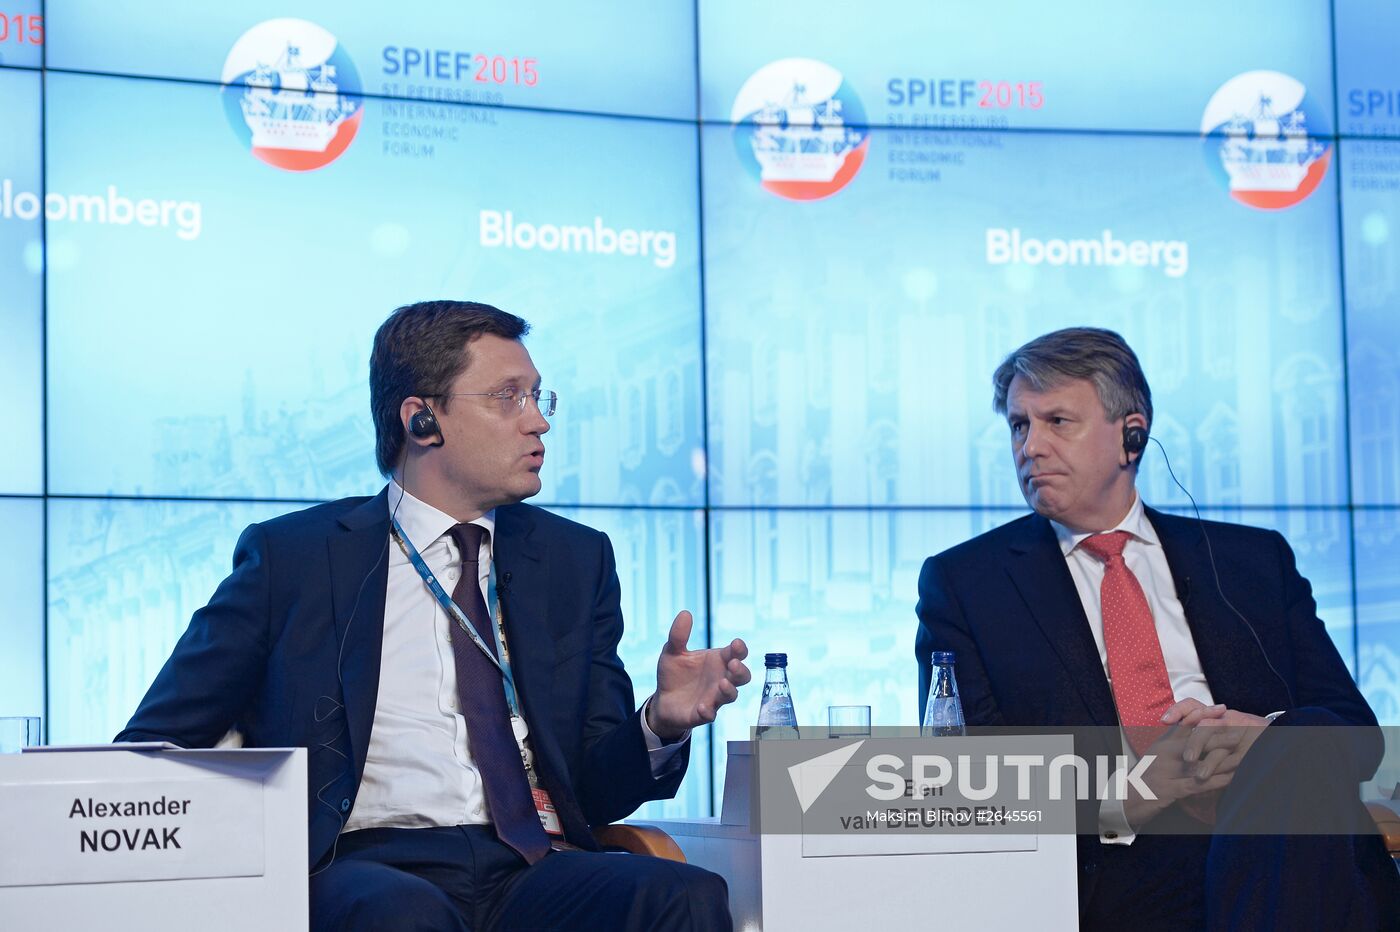 Bloomberg Teledebates, Shifting Landscape Ushers In A New Era For Global Oil And Gas Markets, at 2015 St. Petersburg Economic Forum